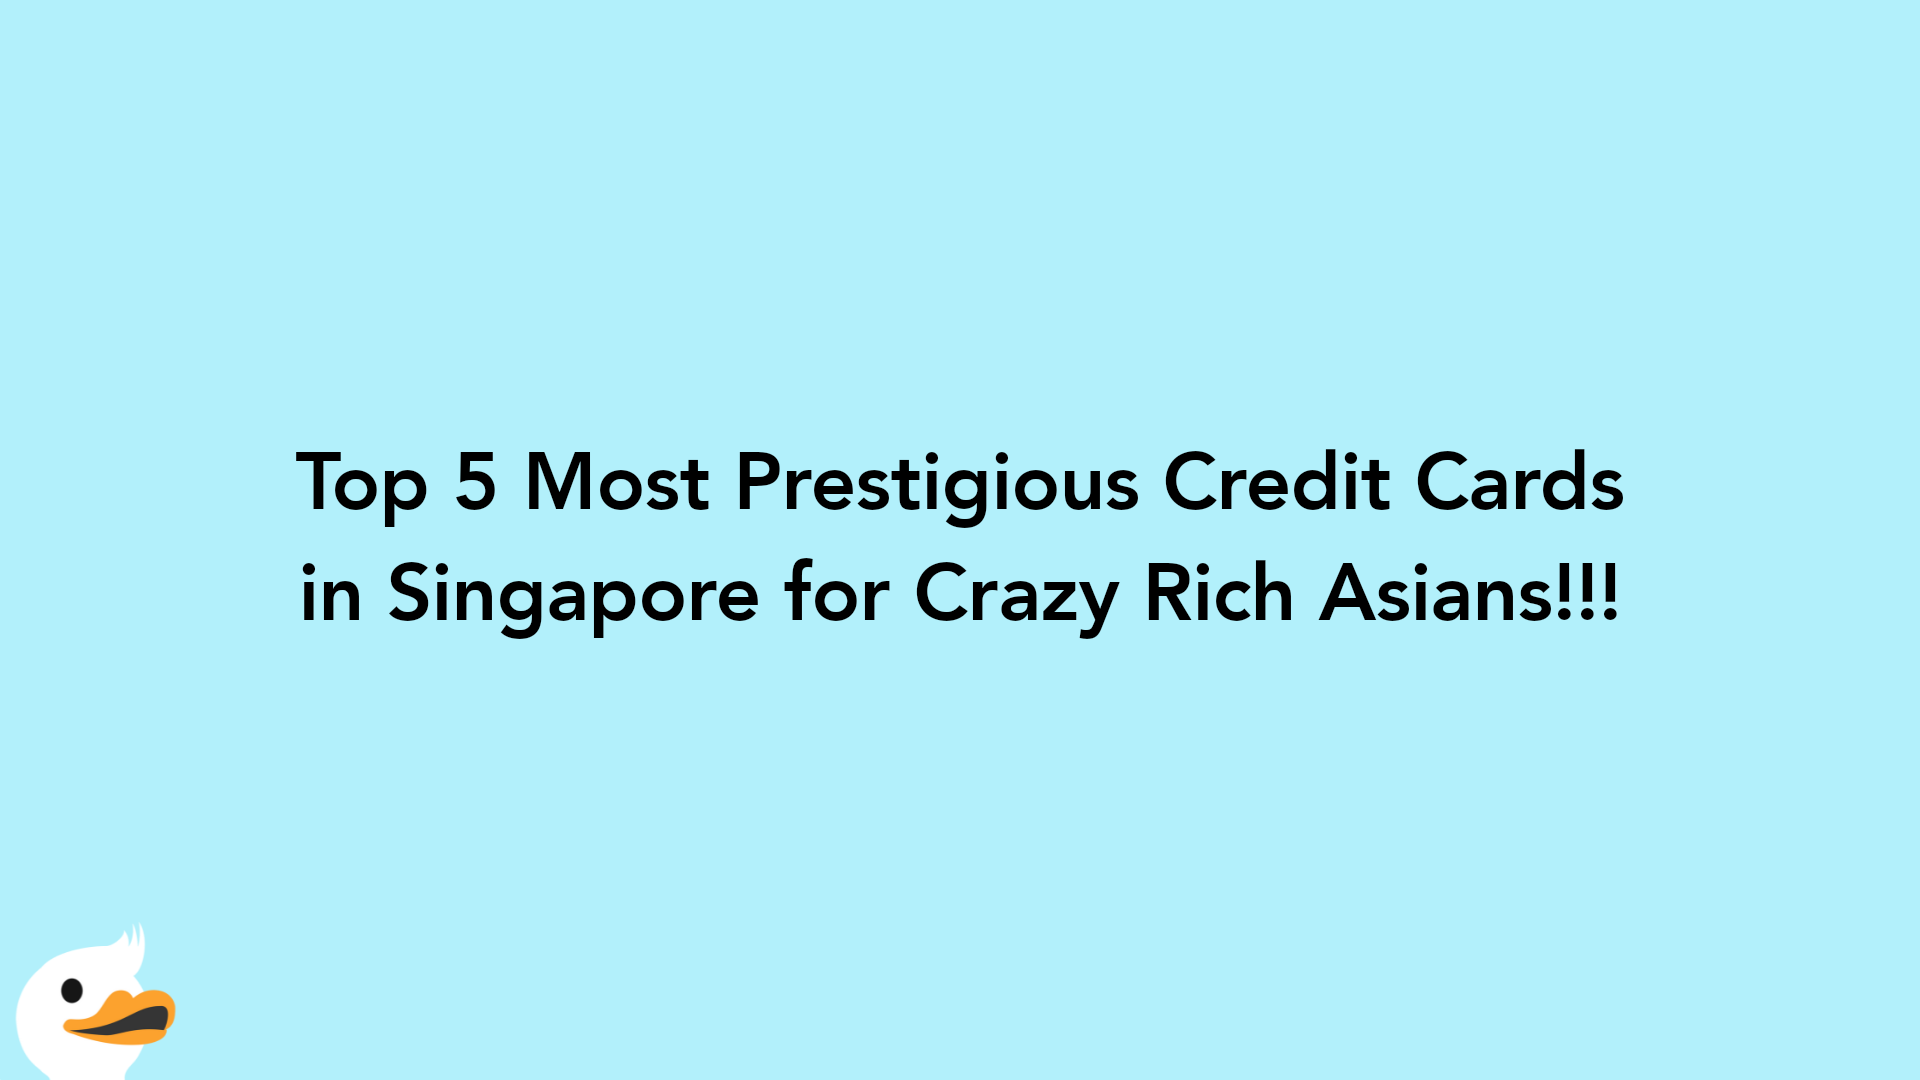 Top 5 Most Prestigious Credit Cards in Singapore for Crazy Rich Asians!!!